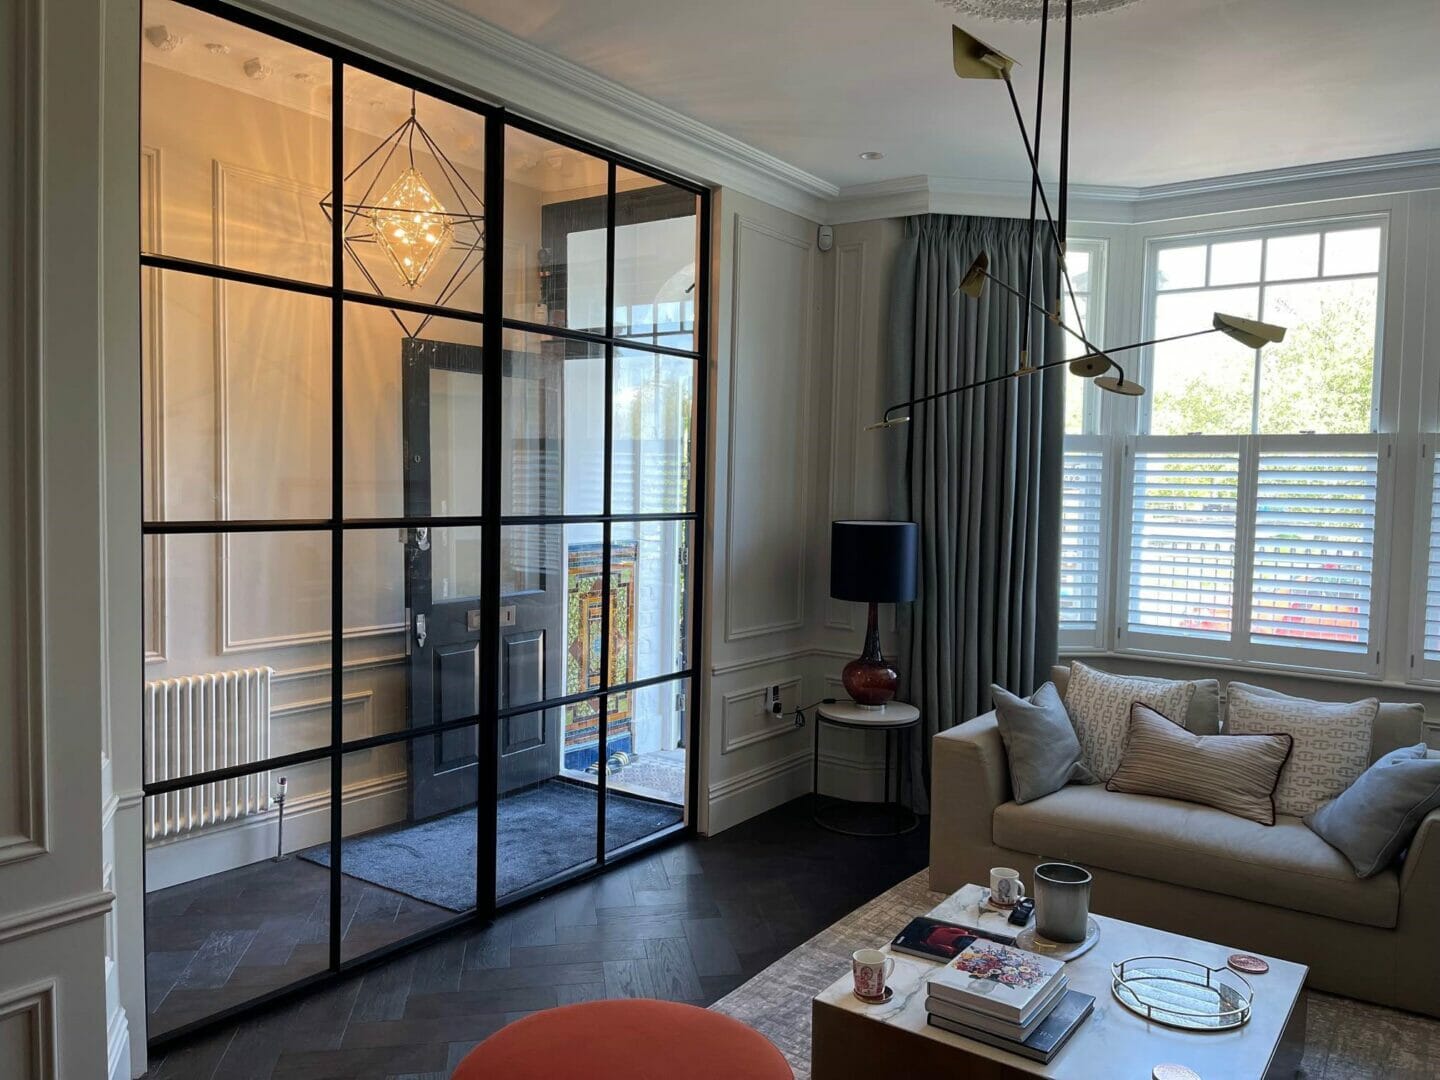 SNUG FIT Individual style is in and creating a snug room is a great way to show it – says Crittall Windows.